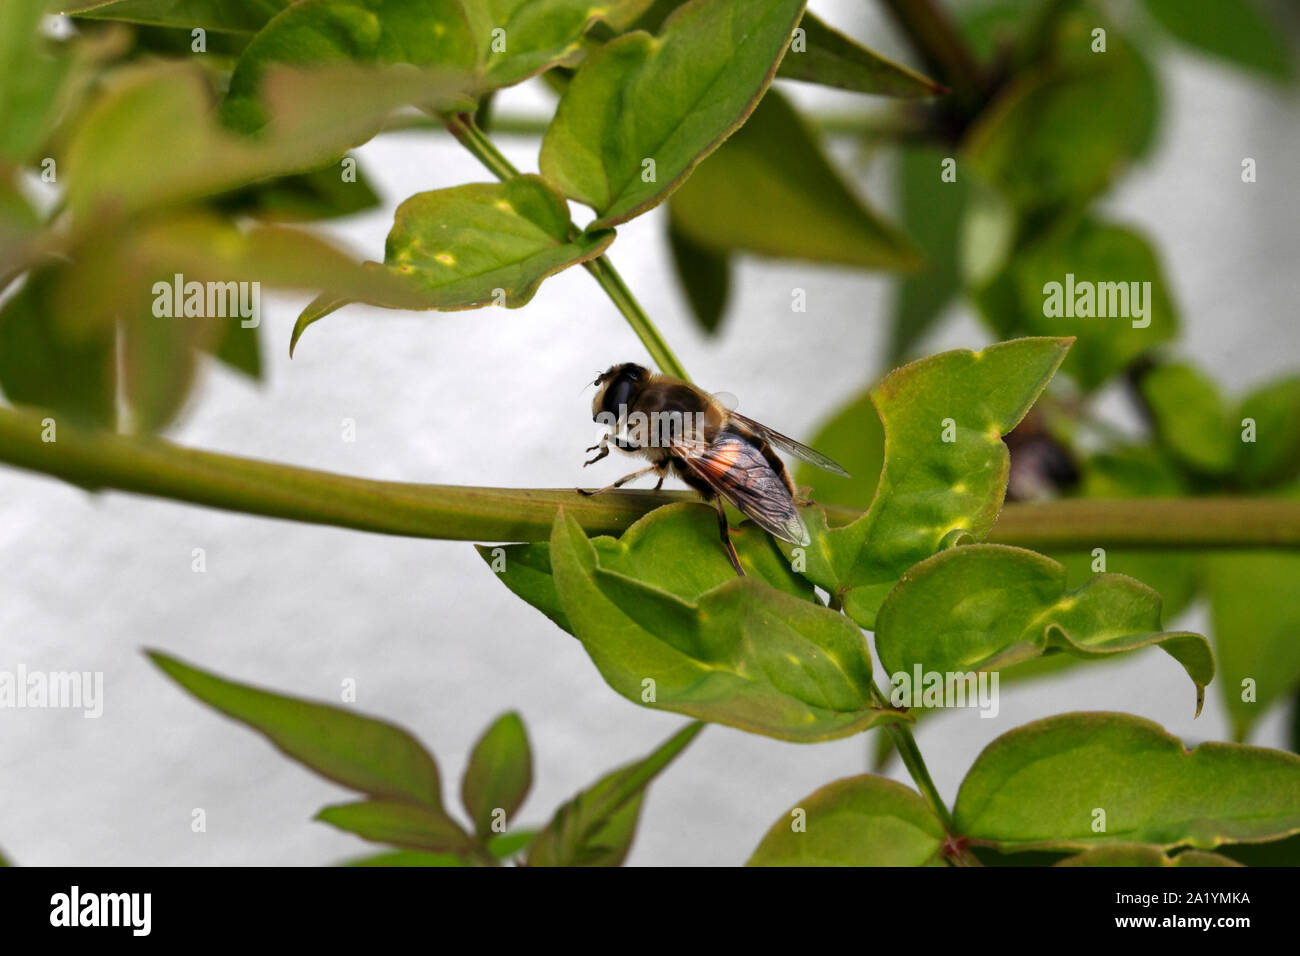 Hoverfly or Drone Fly, Eristalis tenax, Syrphidae, Diptera Stock Photo